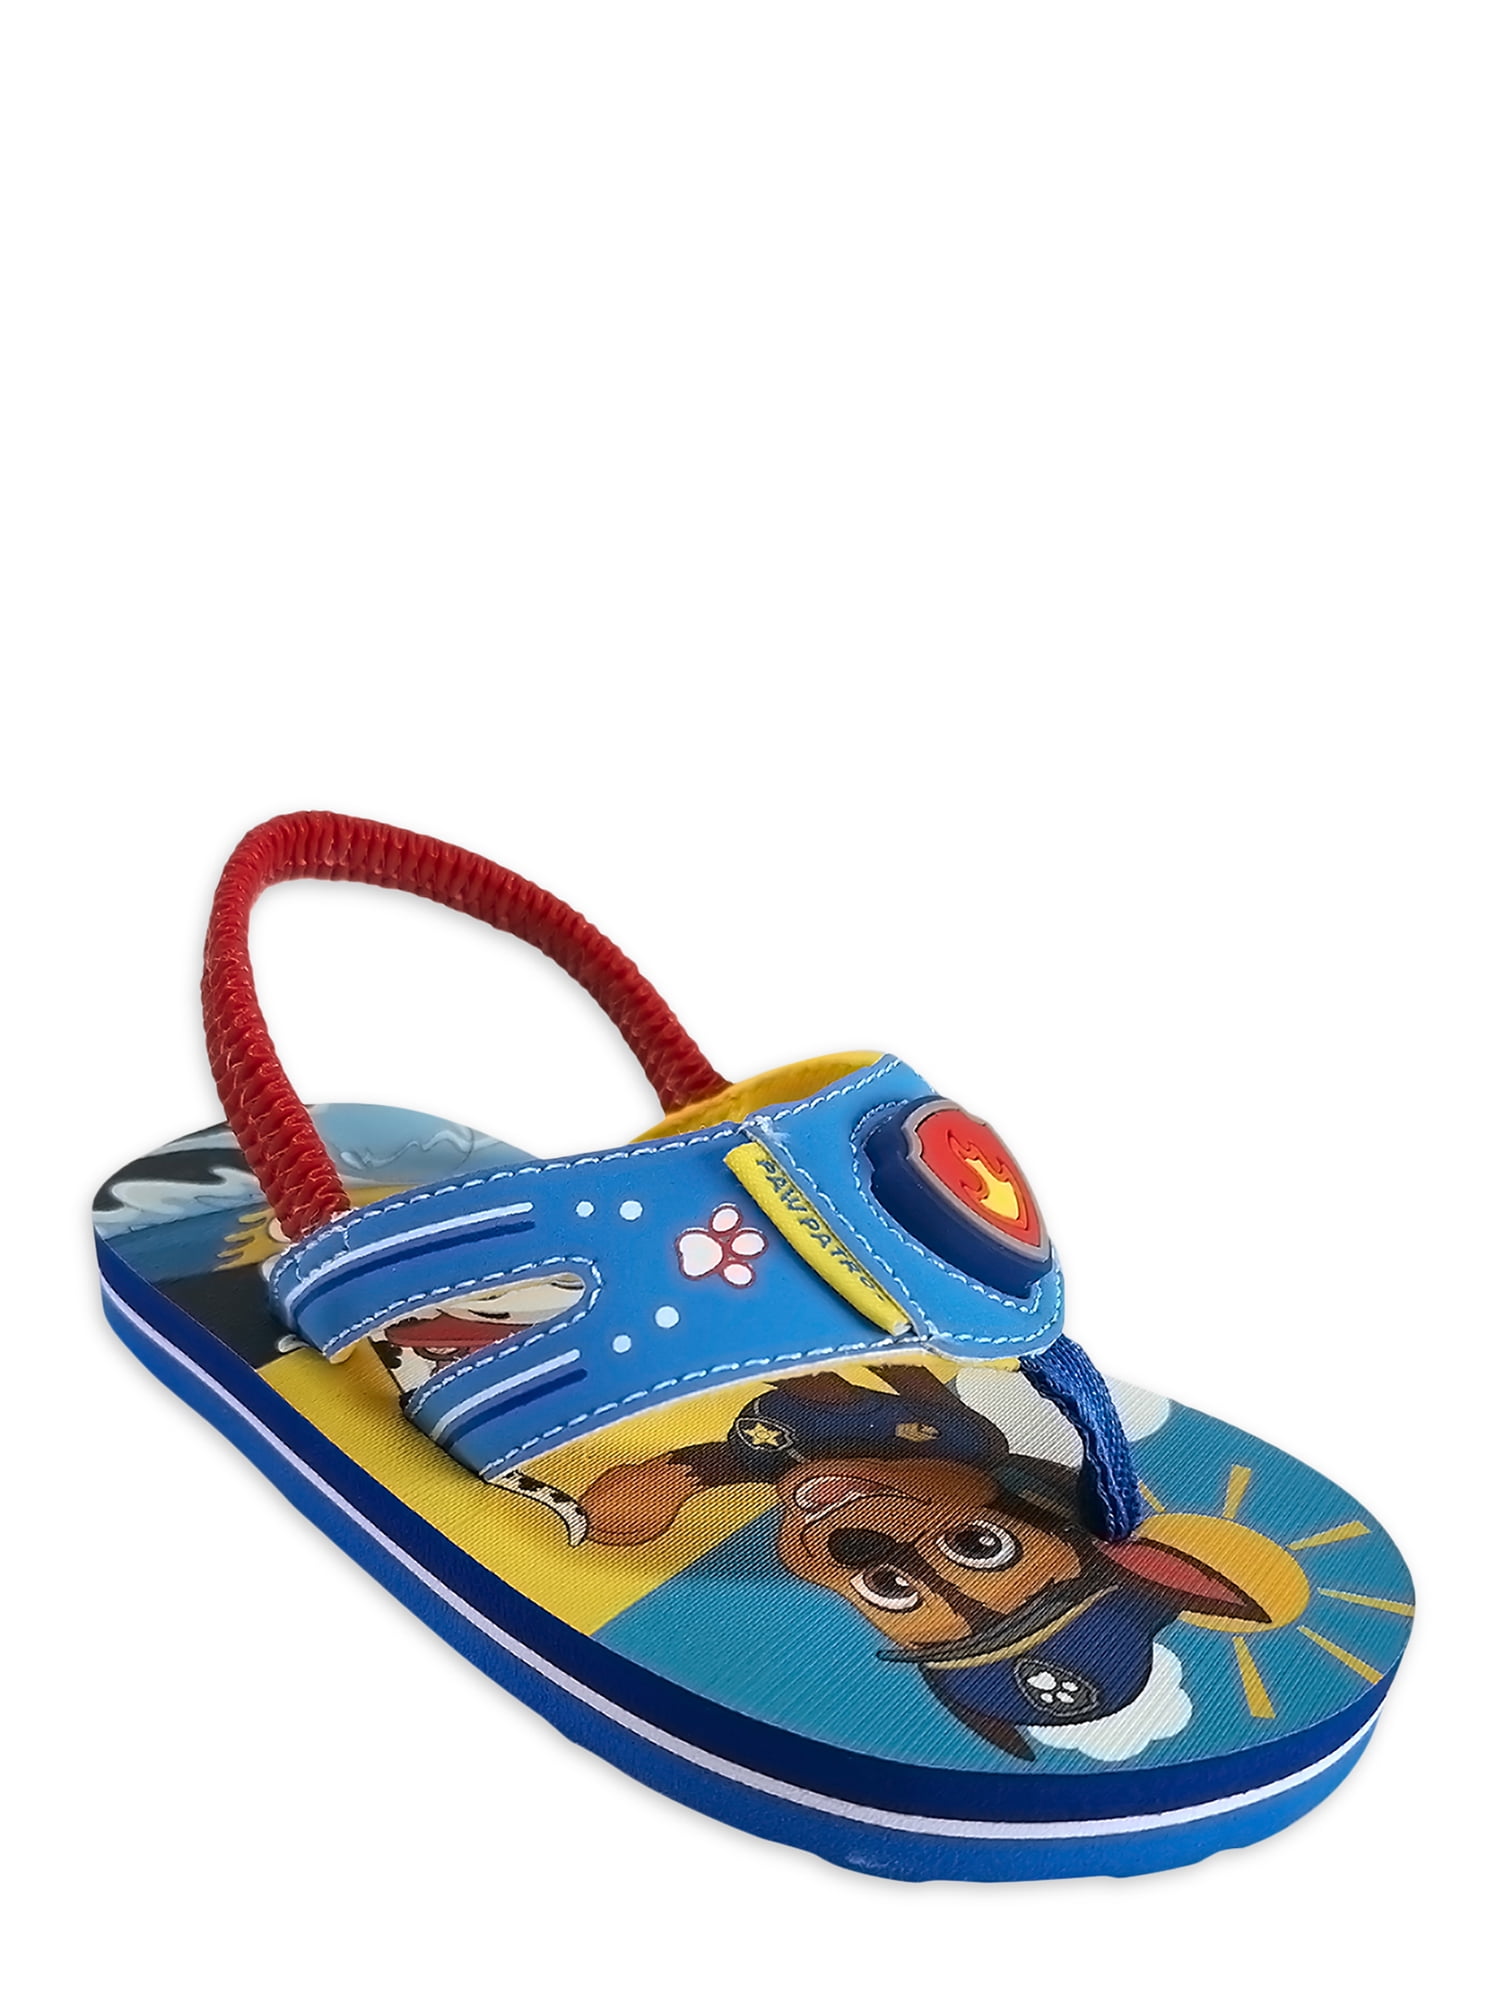 NEW Toddler Boys PAW PATROL Size Small 4 1/2 Summer Shoes Flip-Flops Sandals 